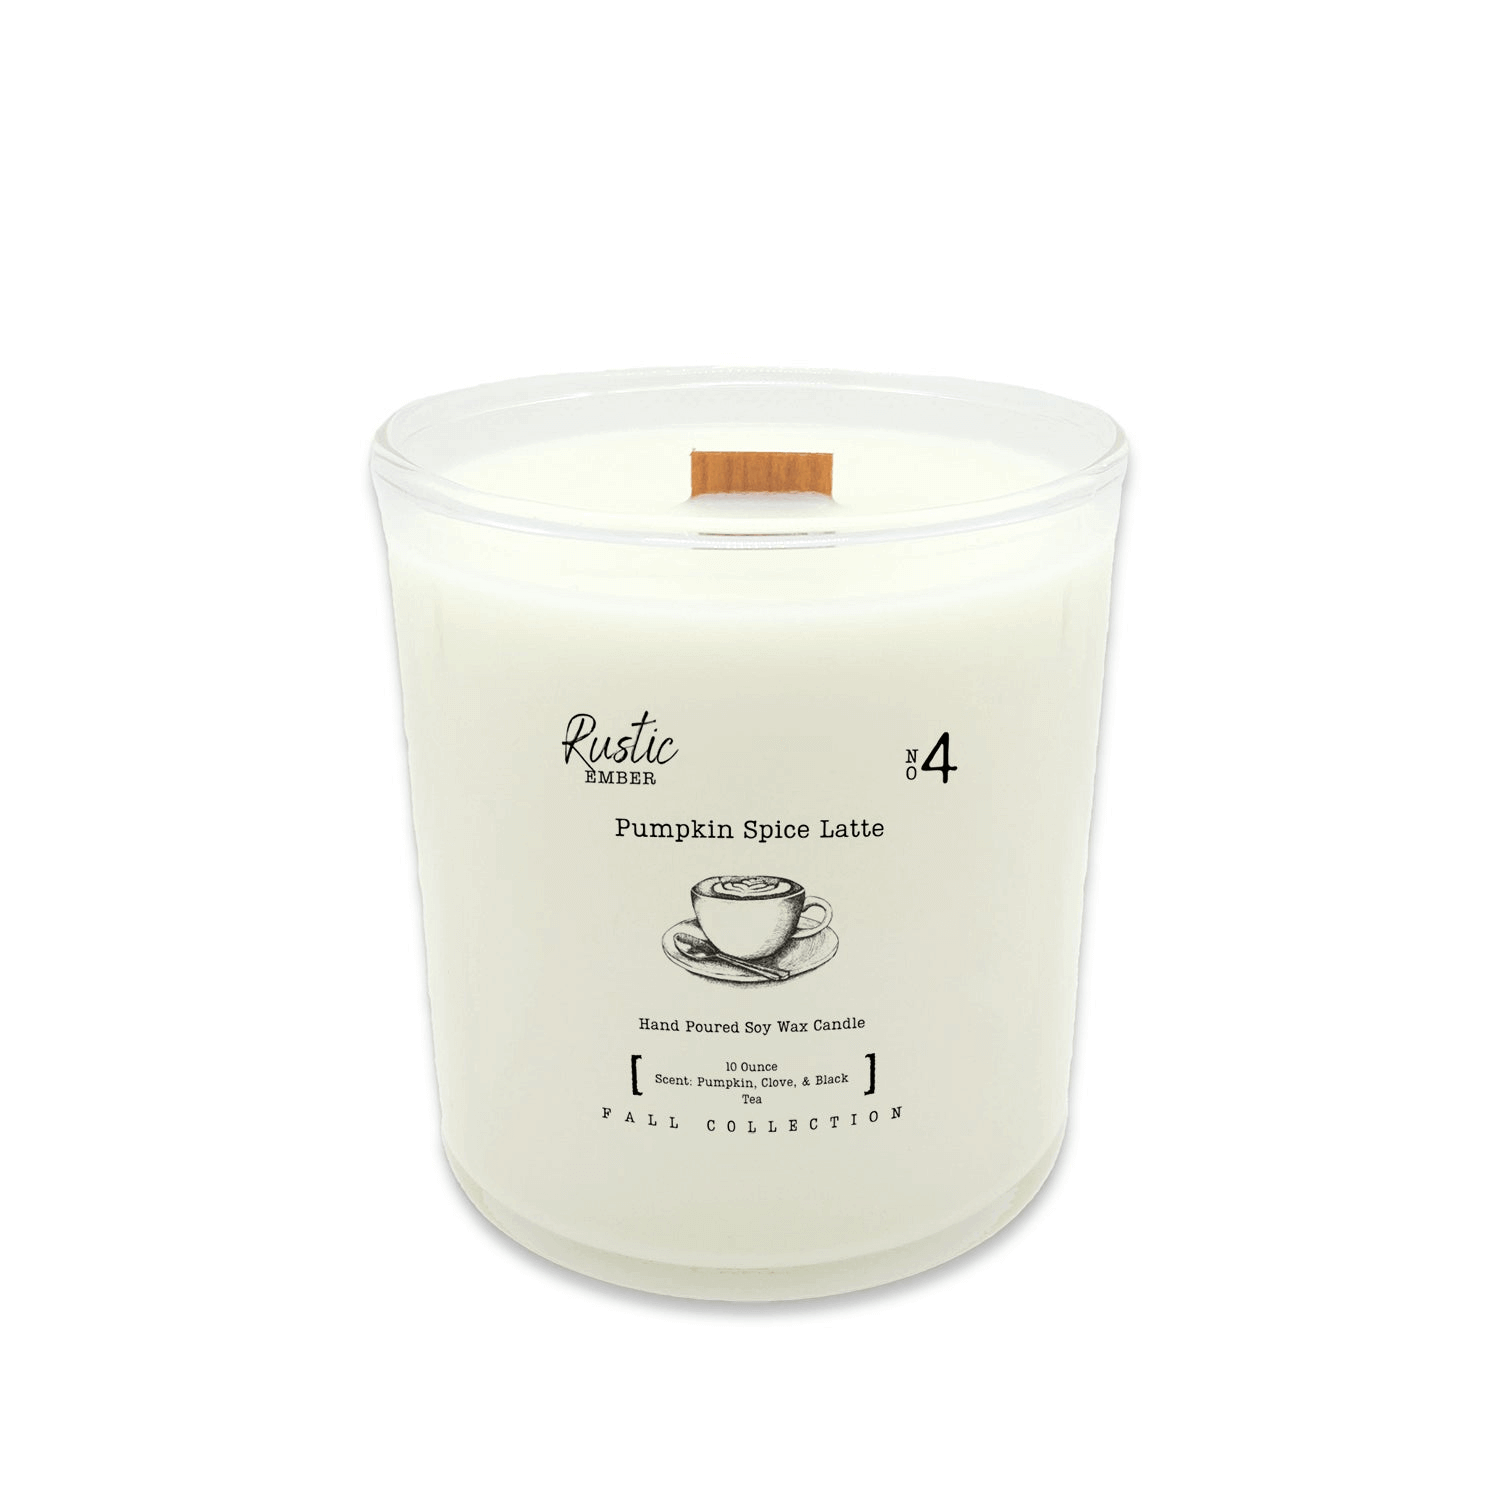 Pumpkin Spice soy candle